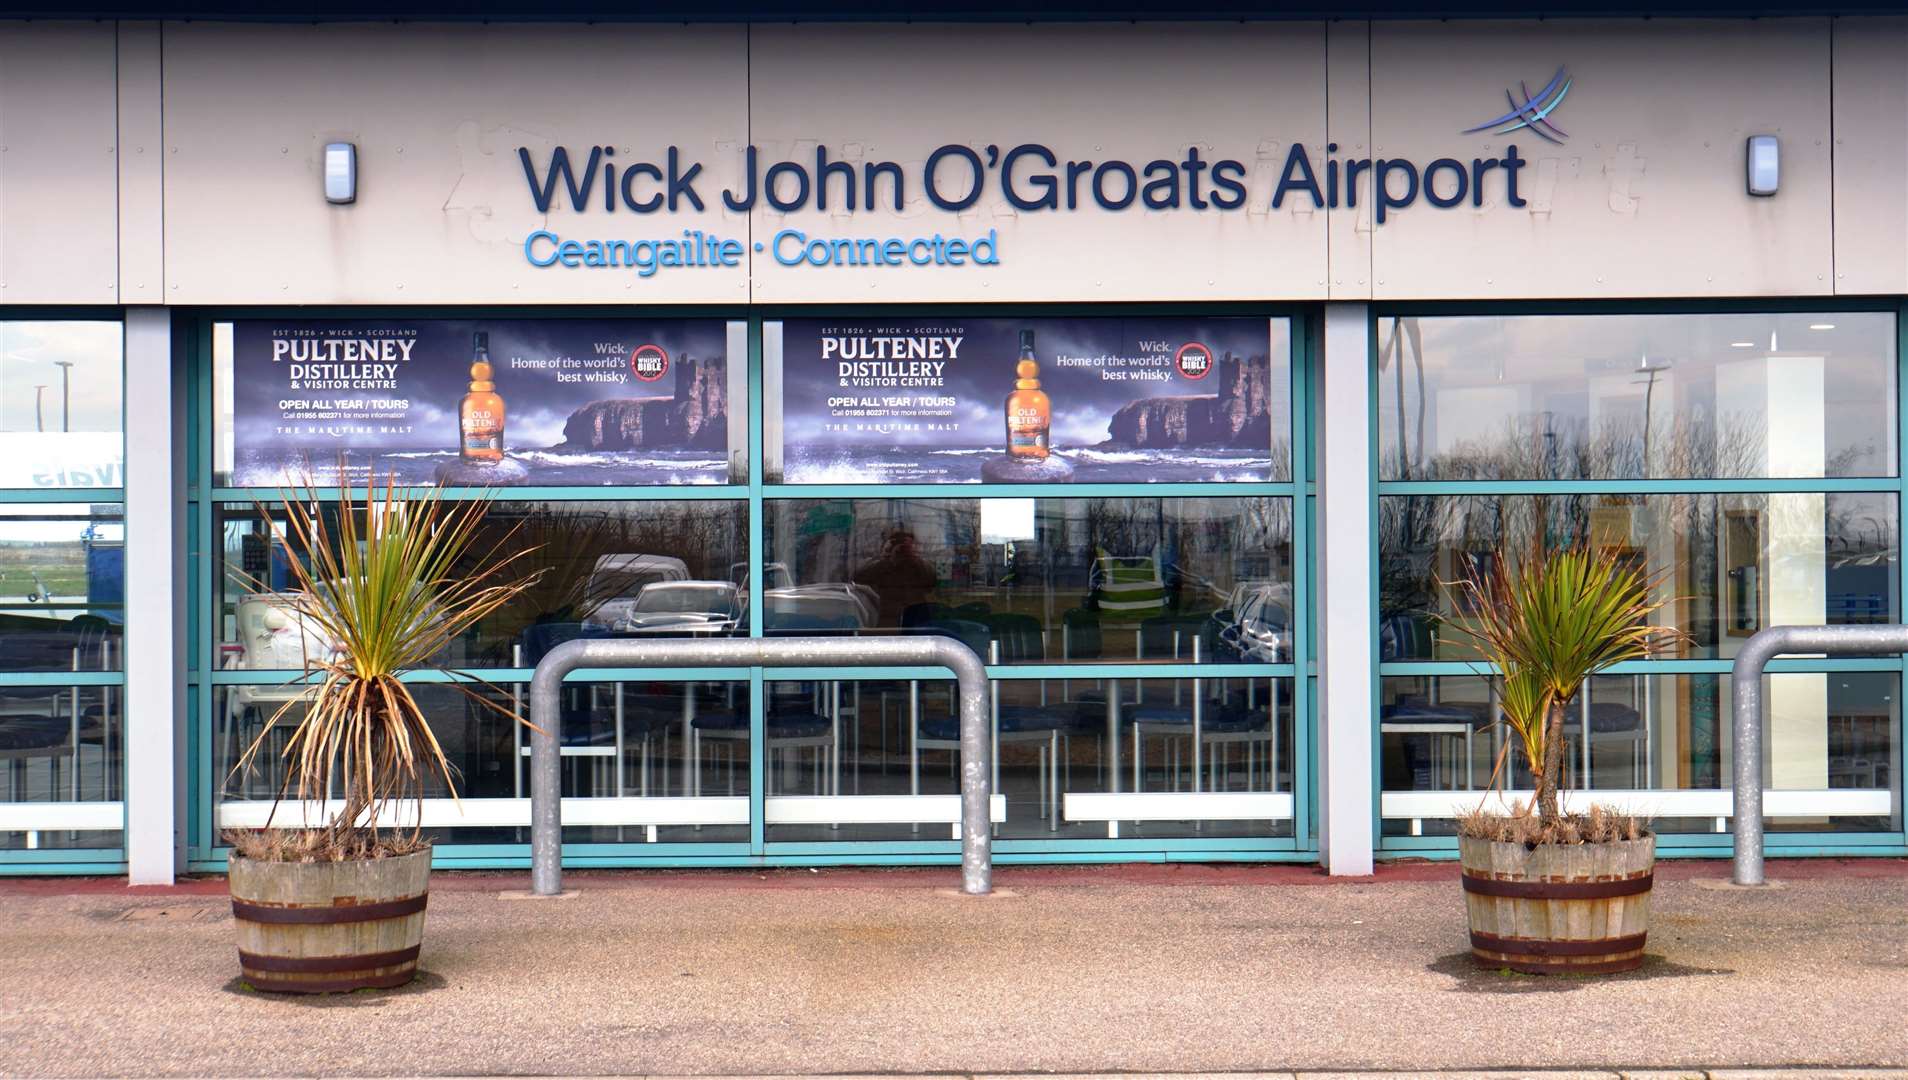 The future of Wick John O'Groats Airport will be in jeopardy without financial support from the Scottish Government, Jamie Stone has warned. Picture: DGS